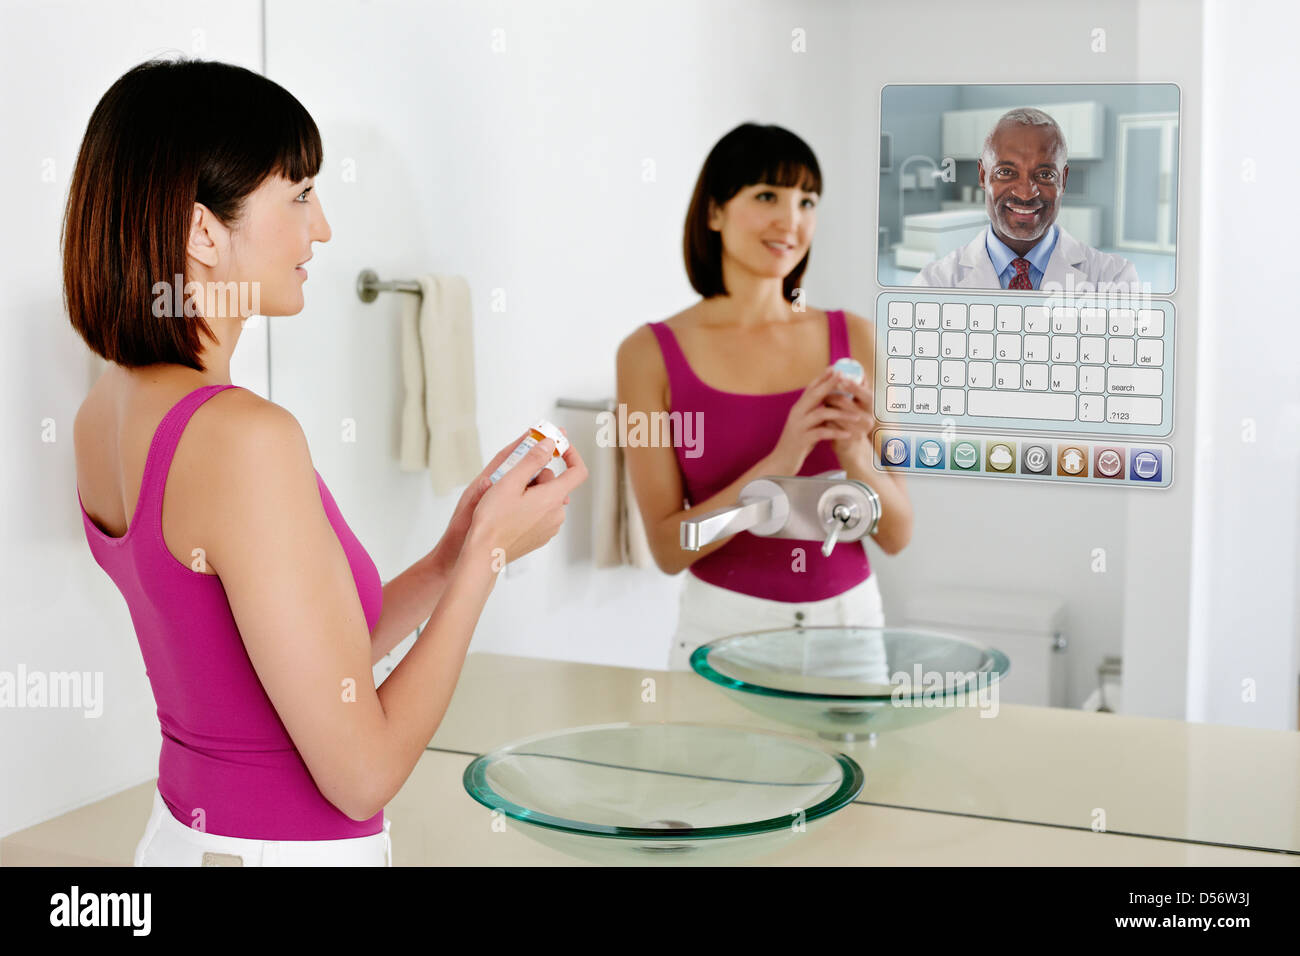 Mixed Race woman using computer in mirror Banque D'Images